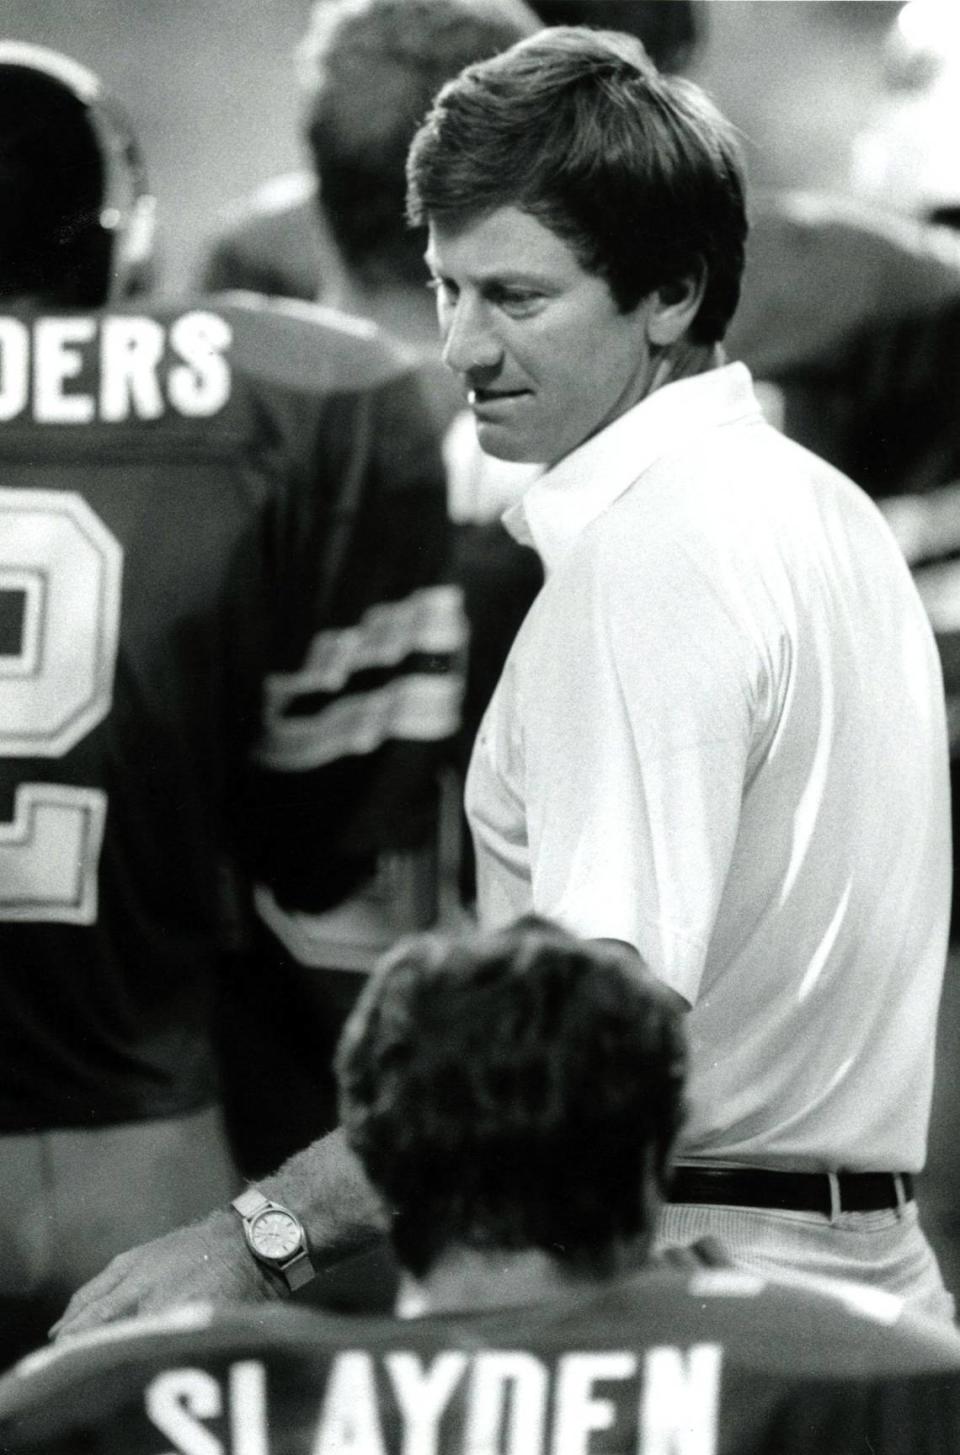 Duke coach Steve Spurrier talks with players on the sidelines during the Duke game against Colgate on Sept. 5, 1987. Spurrier coached the Blue Devils for three years, from 1987-89, winning an ACC championship in 1989 before leaving to take the job at the University of Florida, his alma mater.